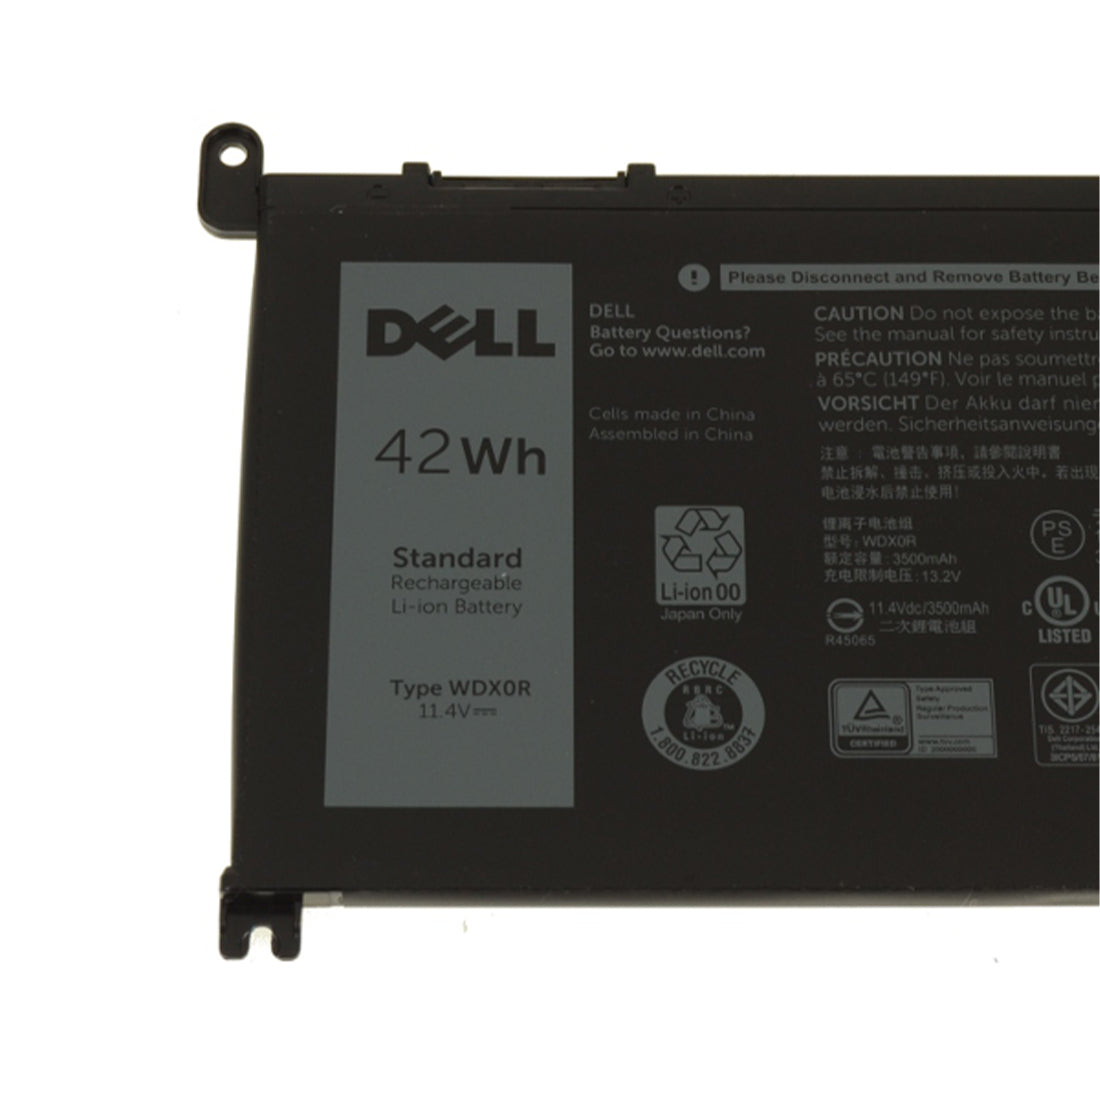 Dell Original 3500mAh 11.4V 42WHR 3-Cell Replacement Laptop Battery for Inspiron 15 7572